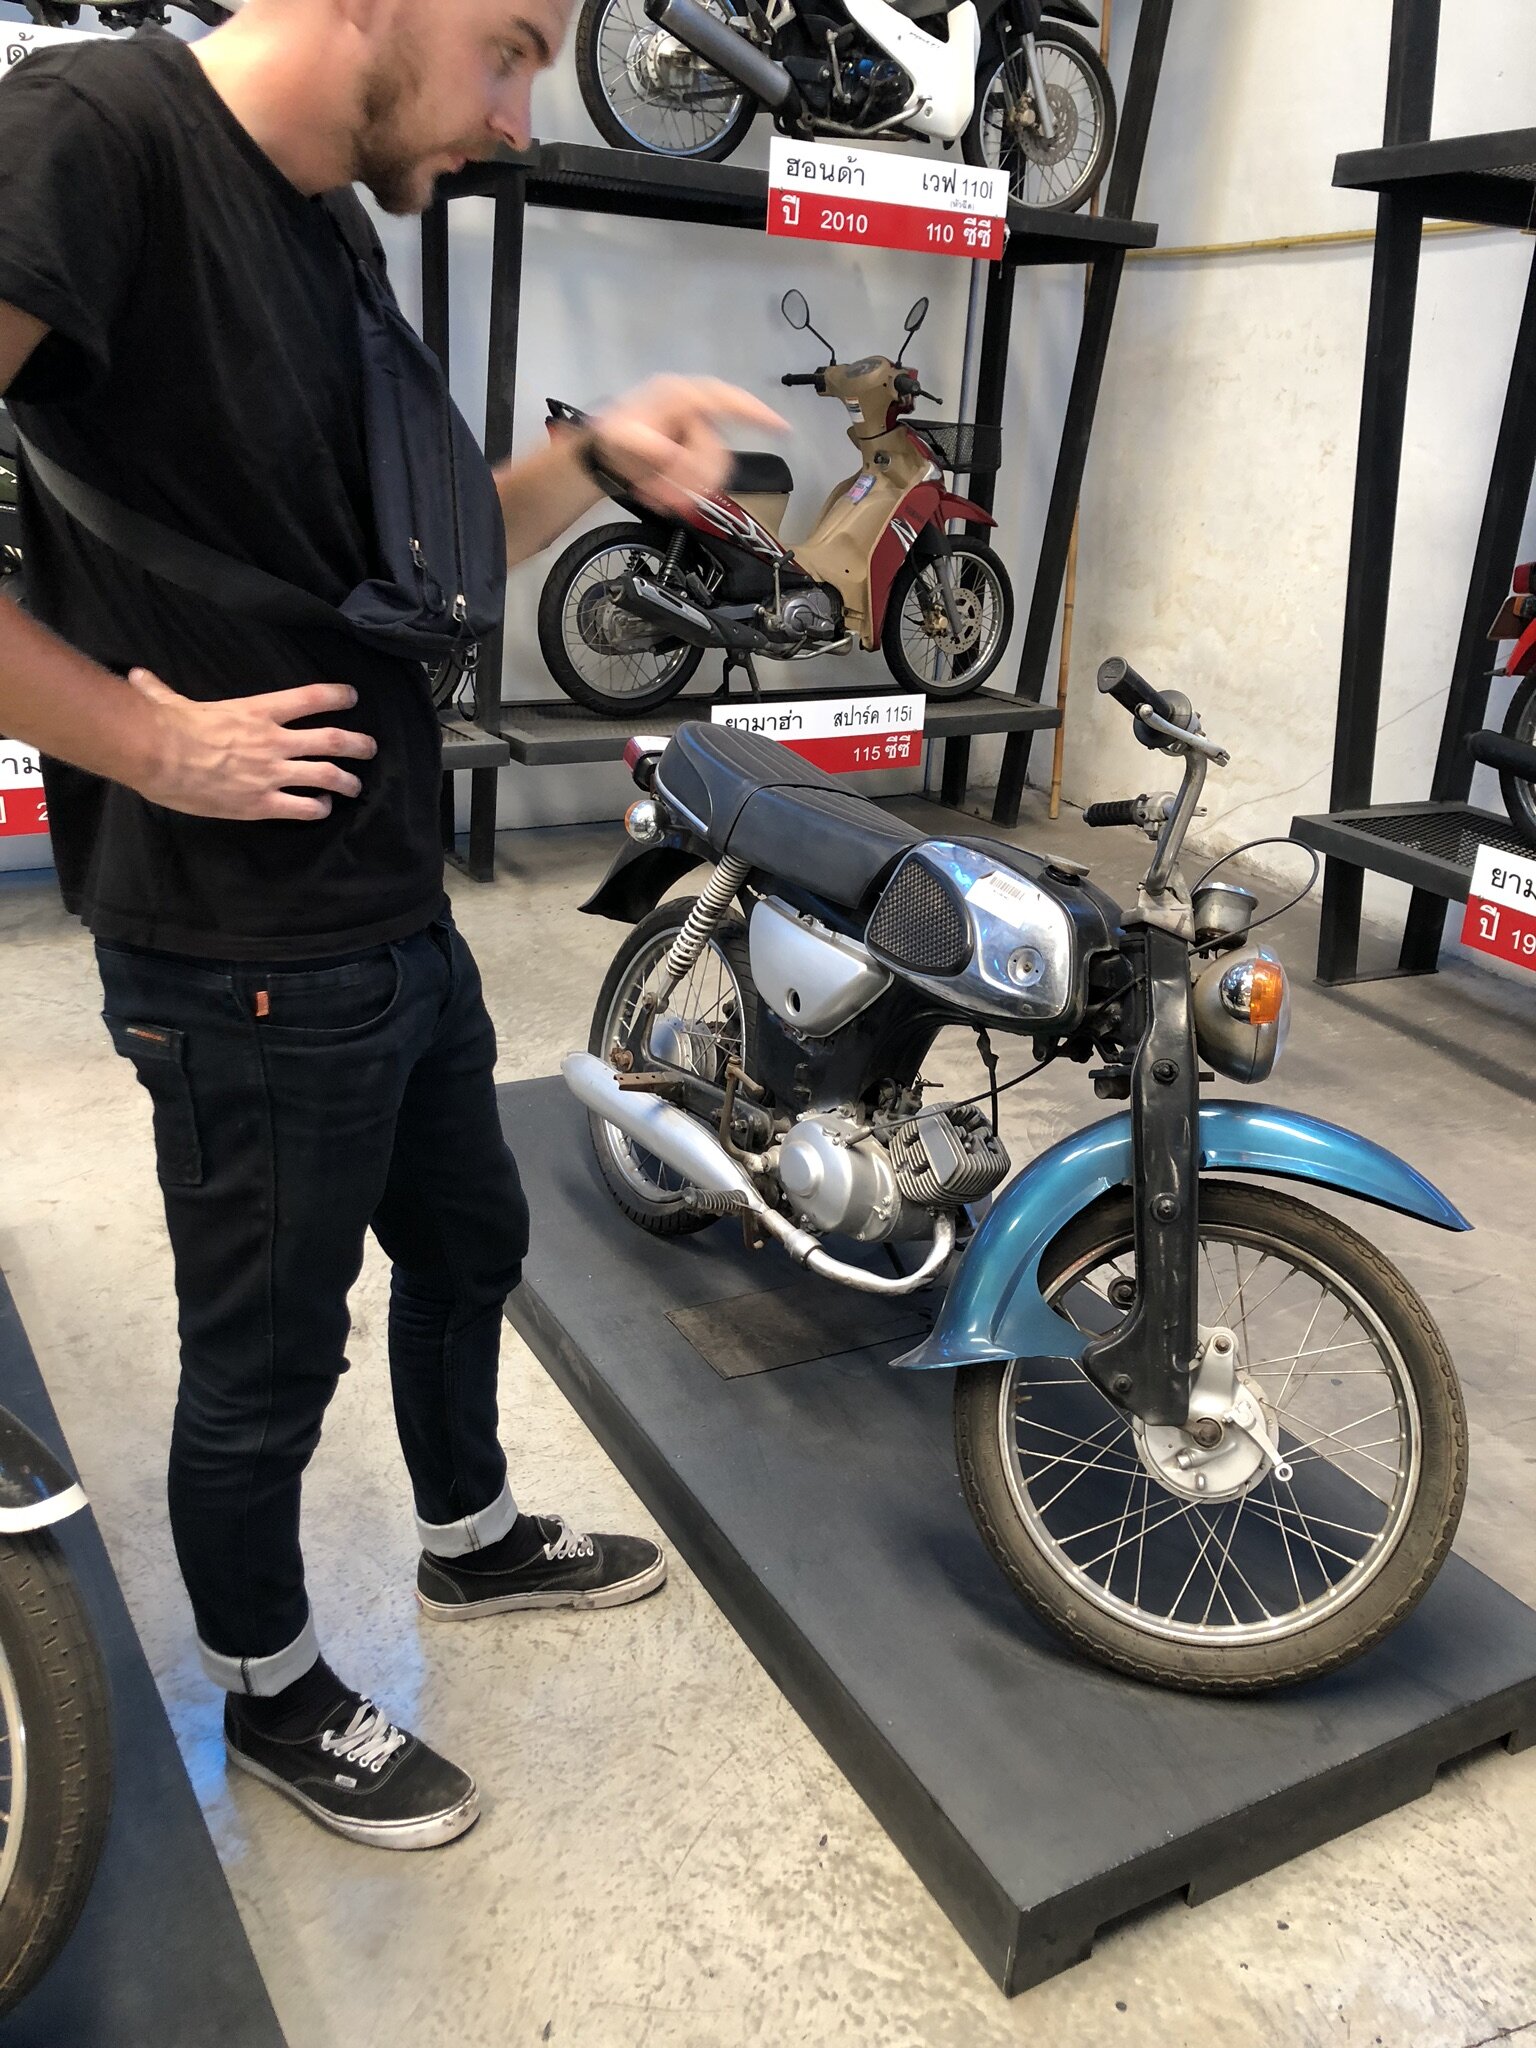 Comparing LHM bikes to ones we've seen before